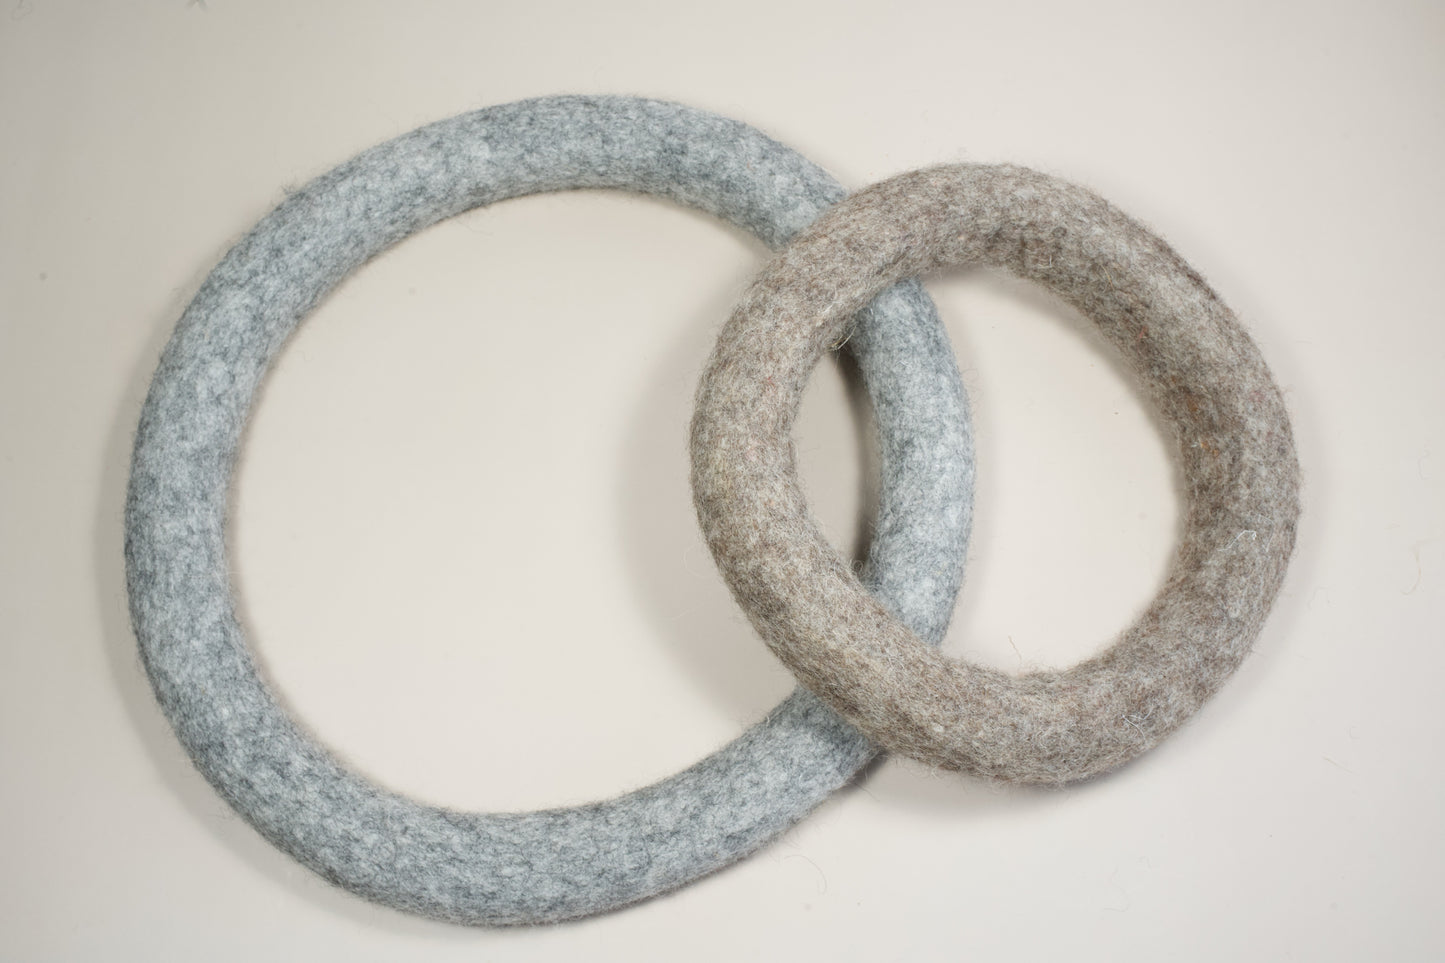 Different sizes and colors of the dog toy ring.